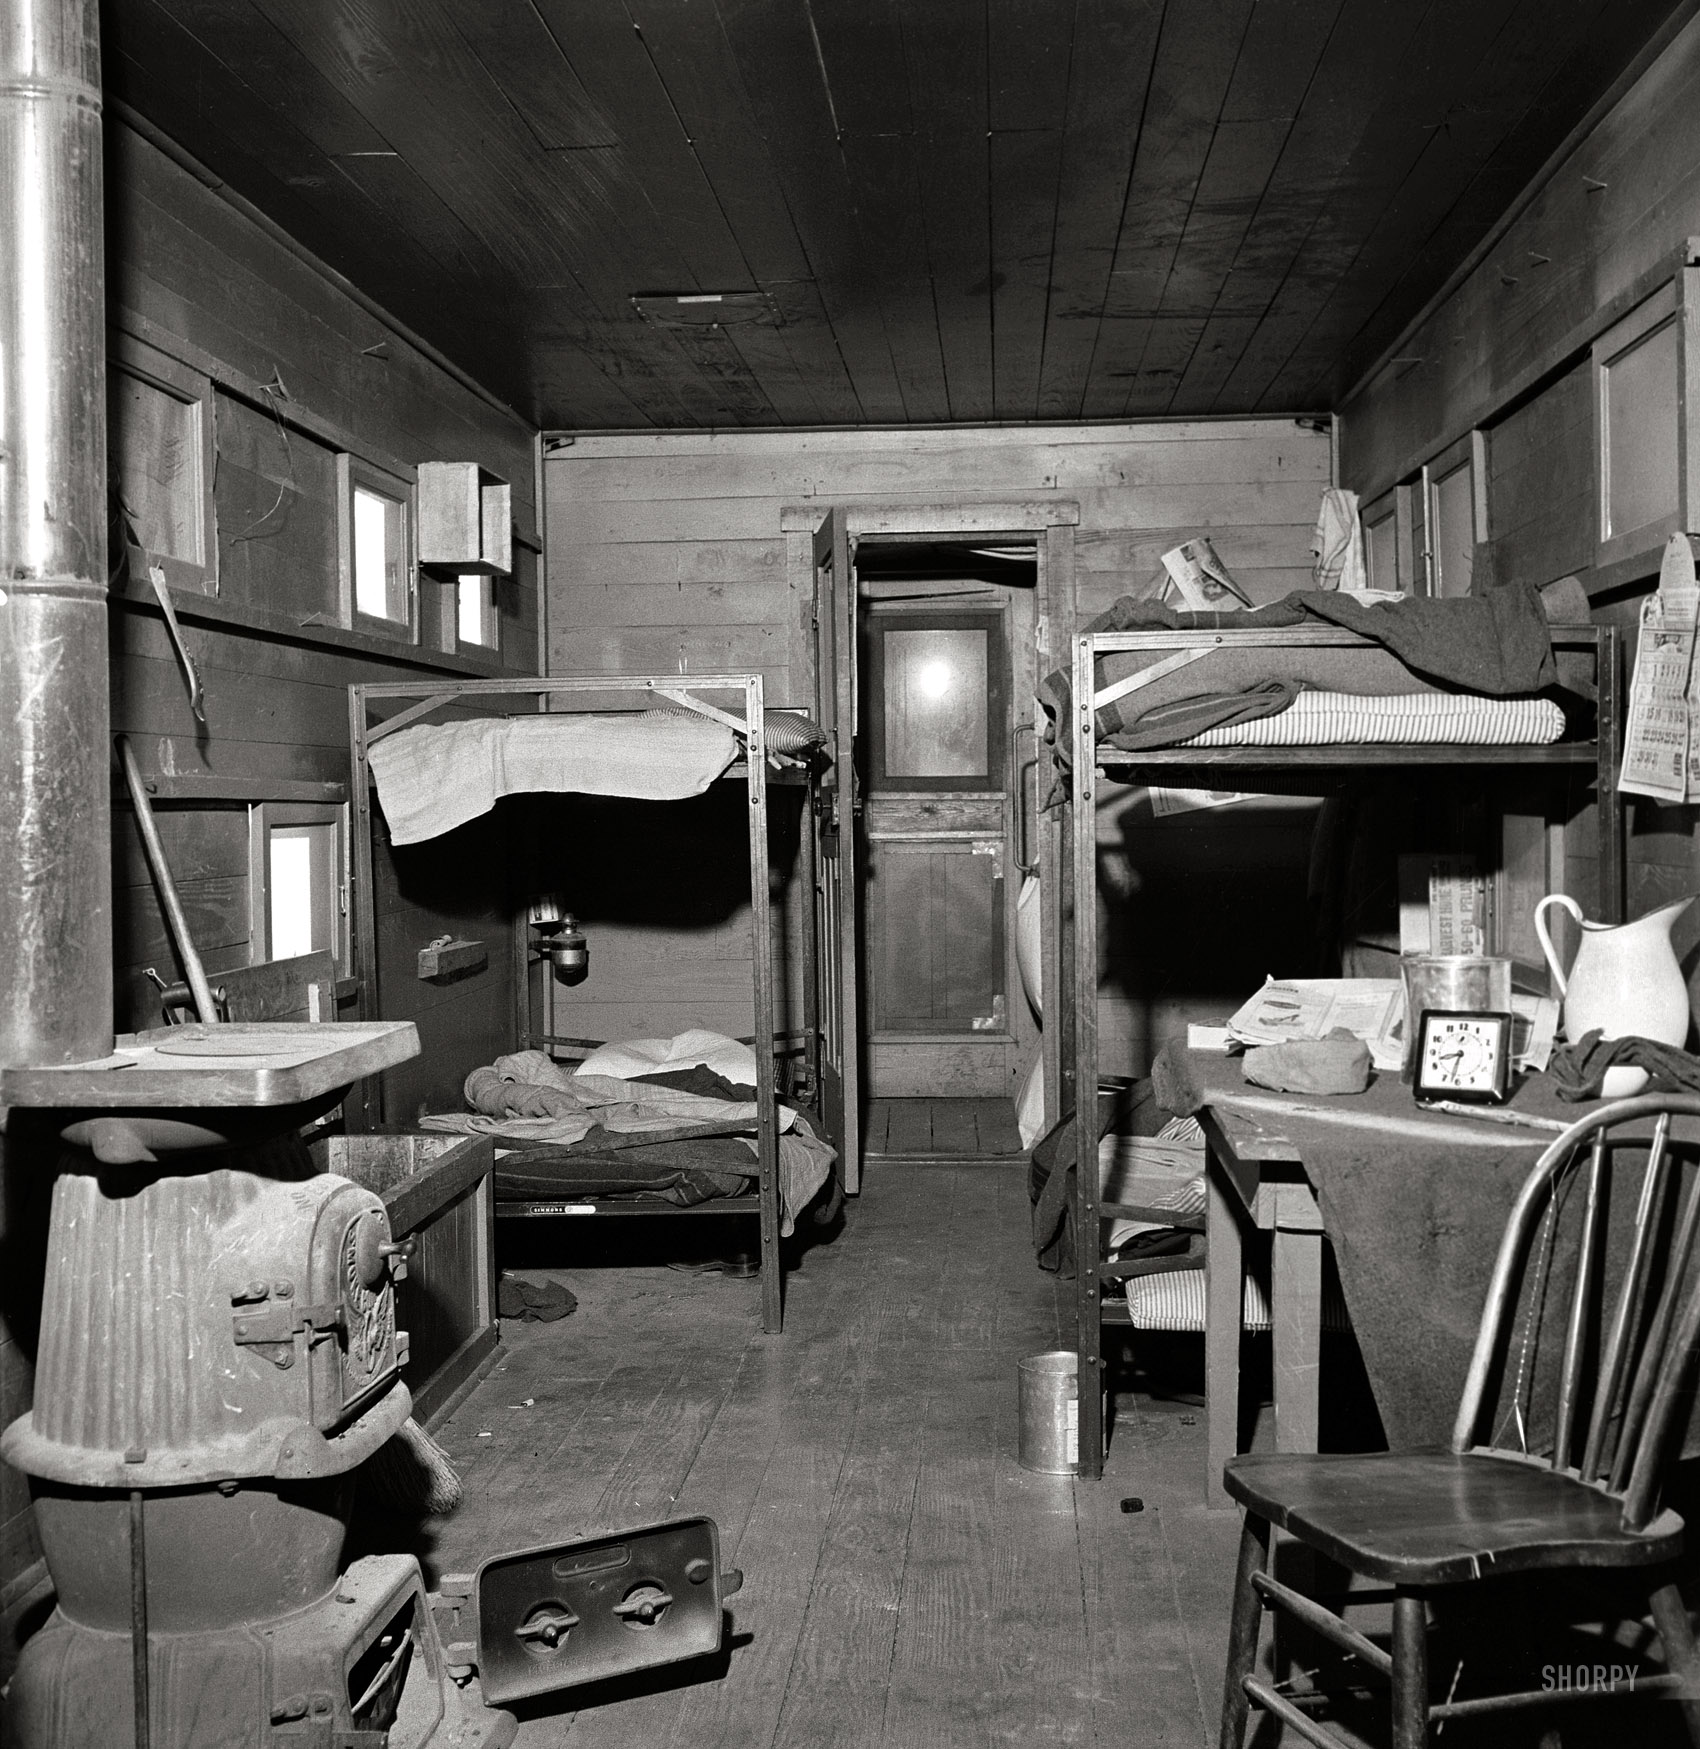 March 1943. "Iden, New Mexico. One of the bunk cars for section workers of a train on the Atchison, Topeka and Santa Fe Railroad between Clovis and Vaughn." Medium-format nitrate negative by Jack Delano. View full size.